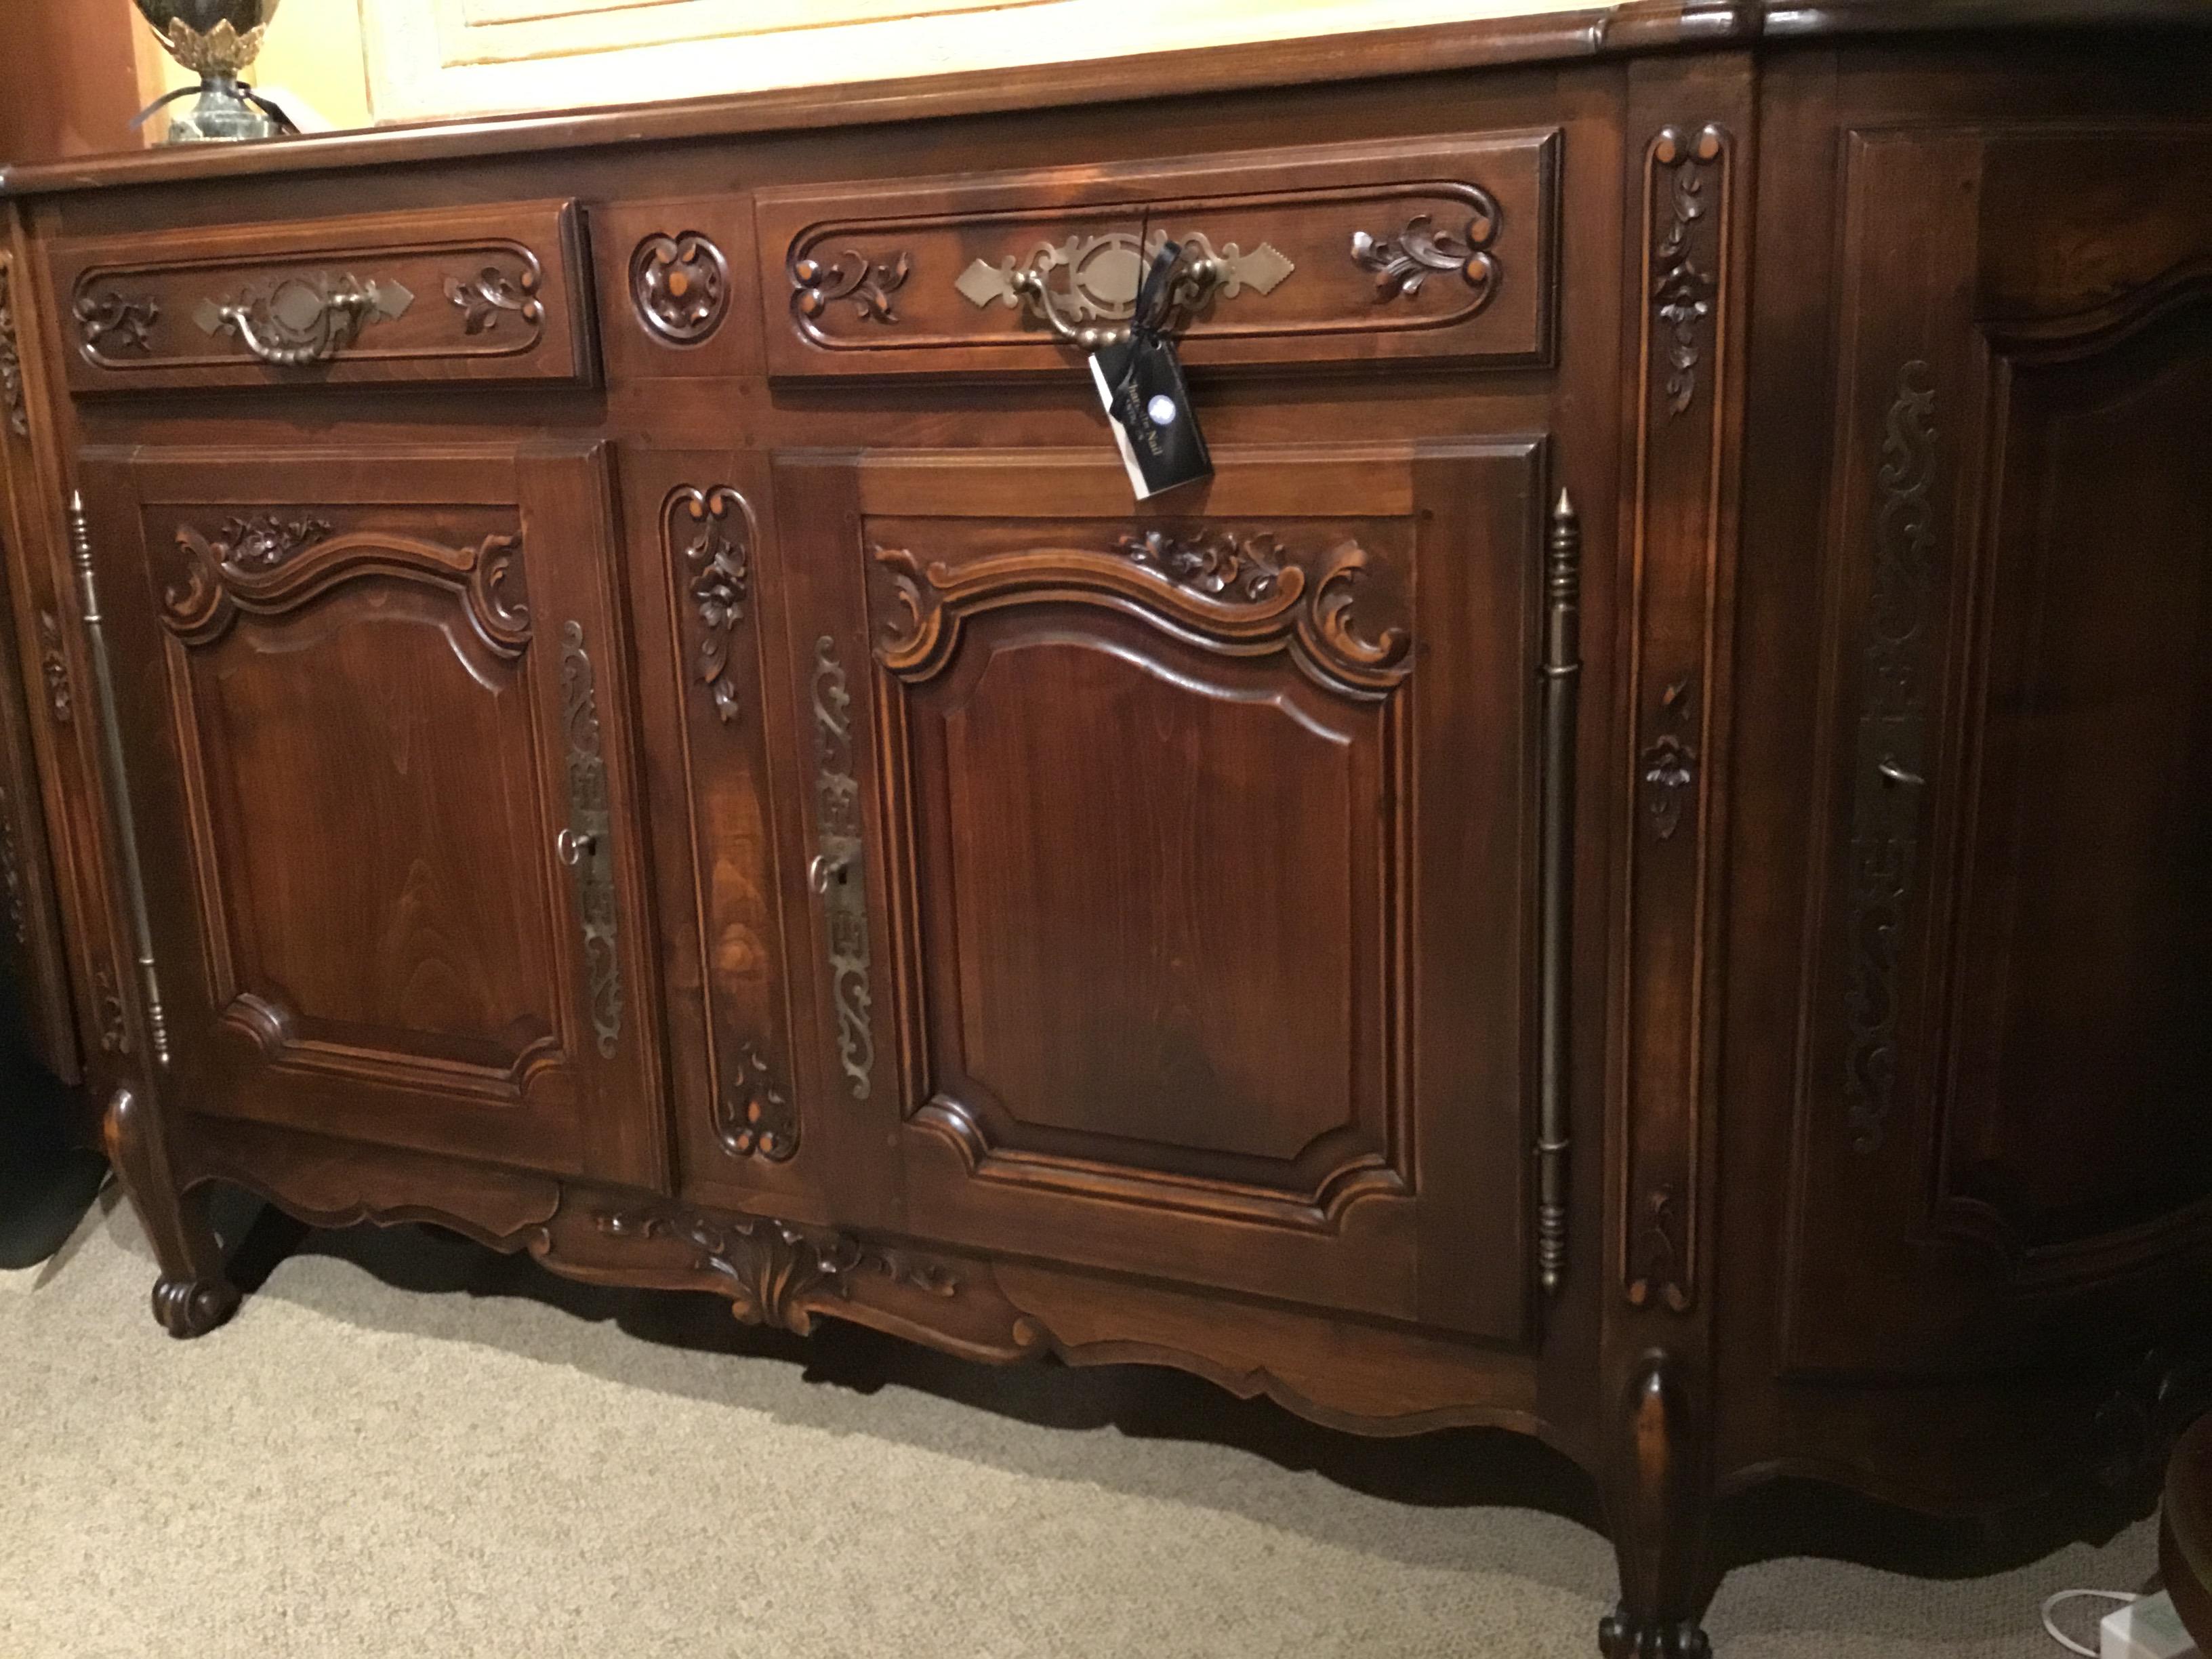 French country sideboard
Louis XV style
dark walnut finish with parquetry top.